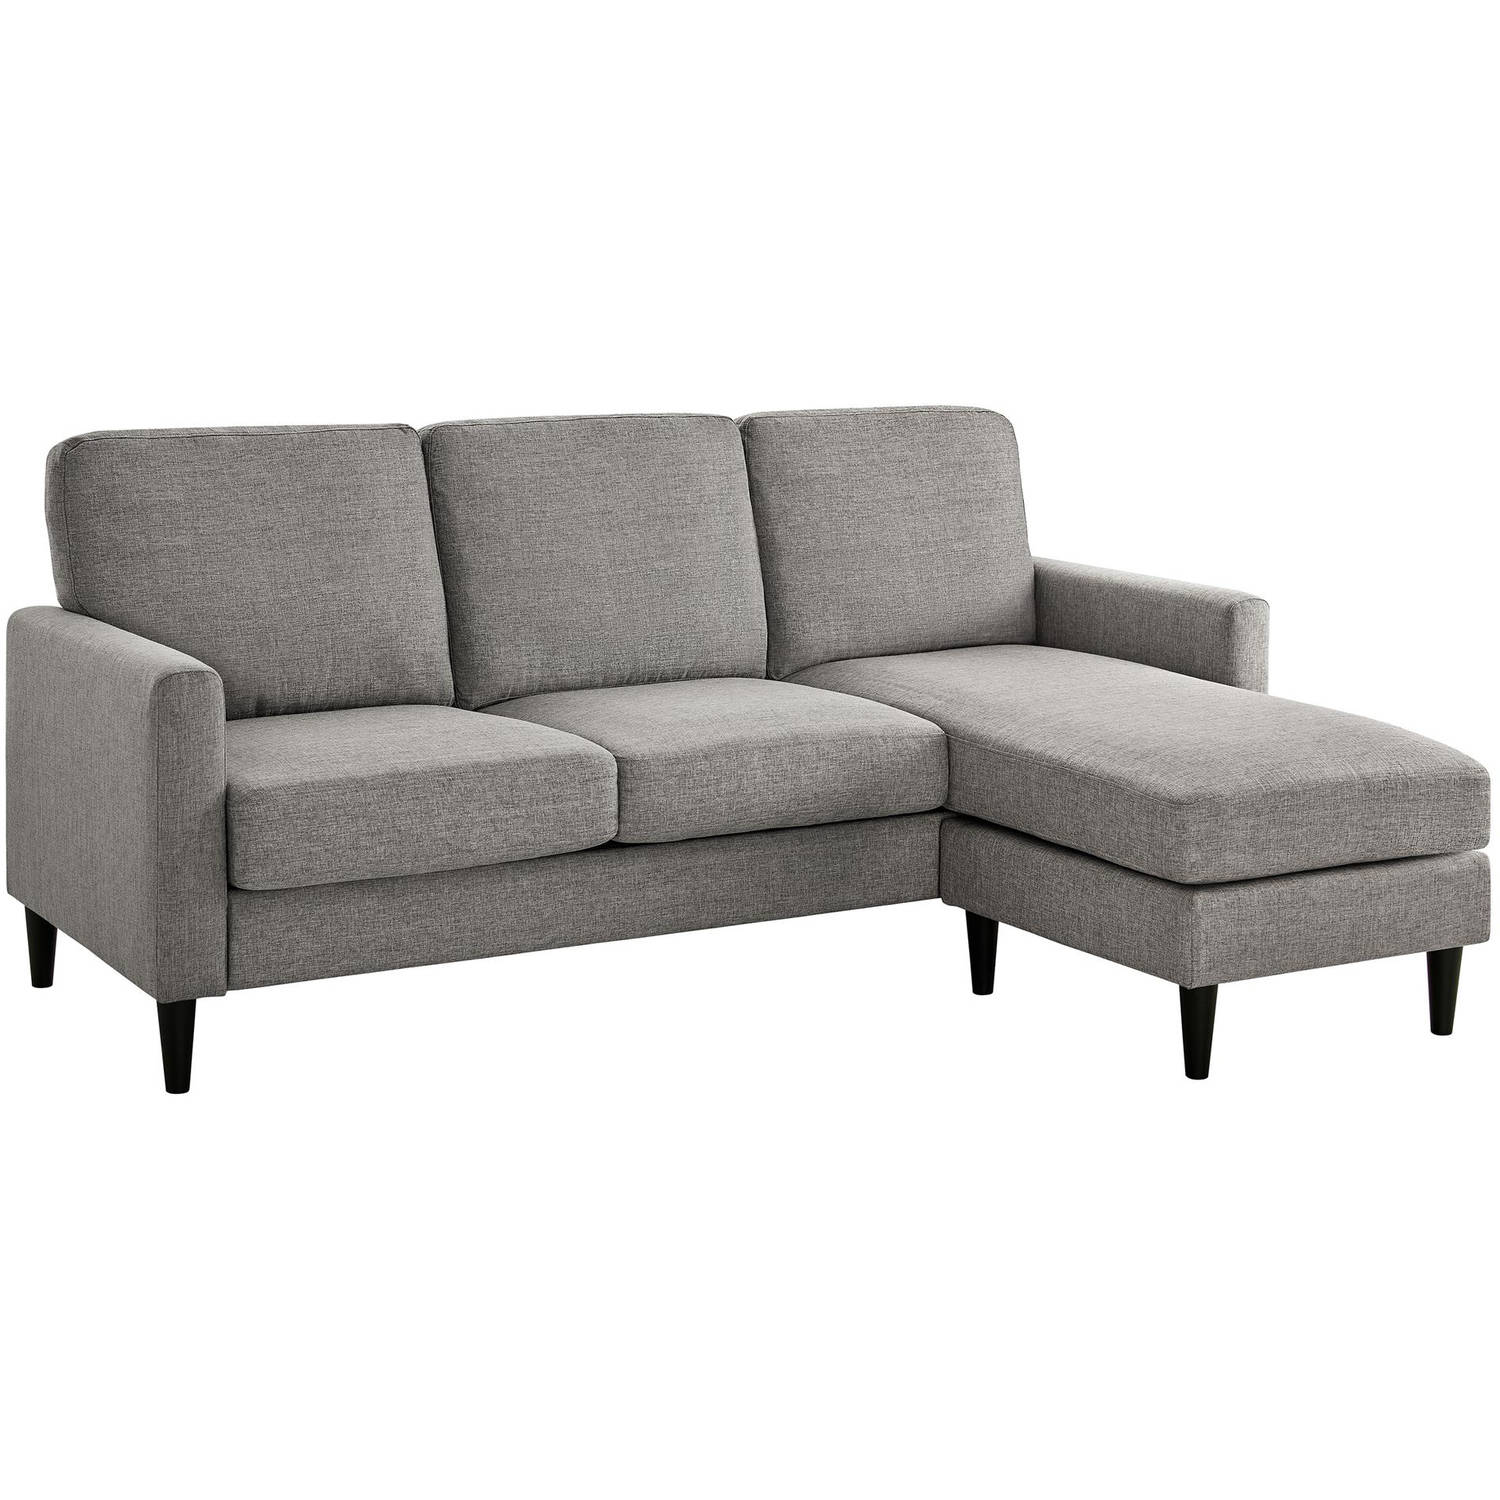 Dorel Living Kaci Reversible Contemporary Upholstered Sectional, Gray - image 4 of 10